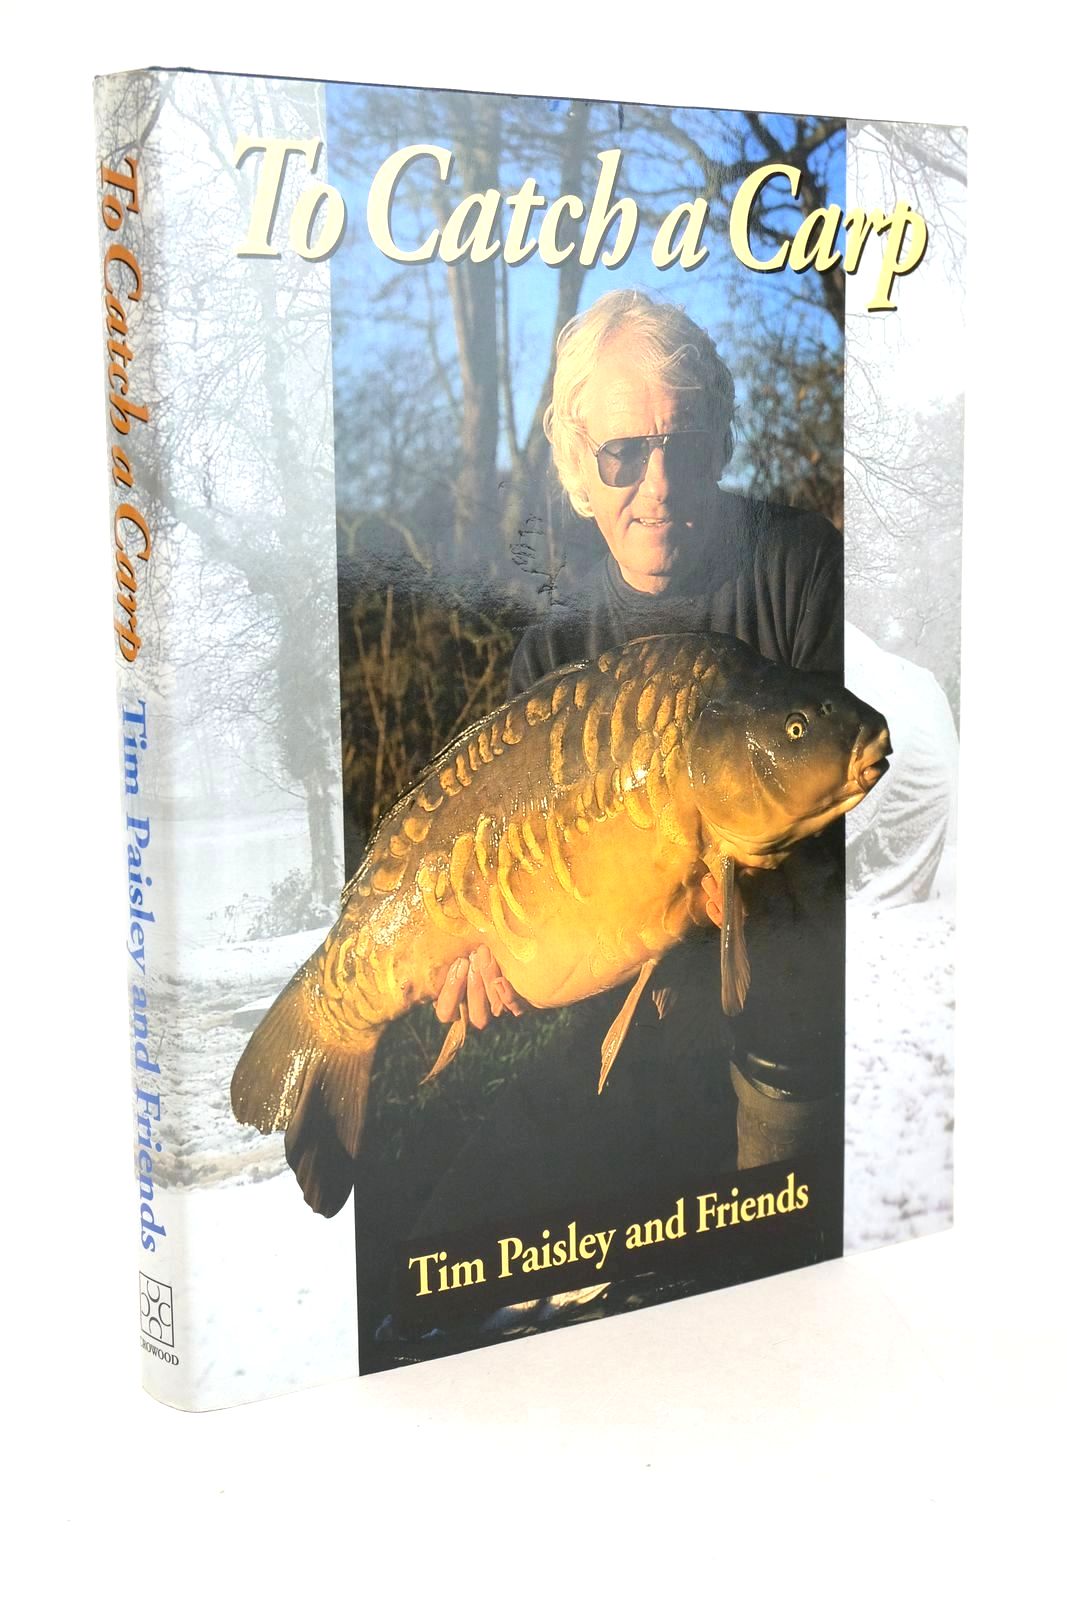 Photo of TO CATCH A CARP written by Paisley, Tim et al, published by The Crowood Press (STOCK CODE: 1327571)  for sale by Stella & Rose's Books